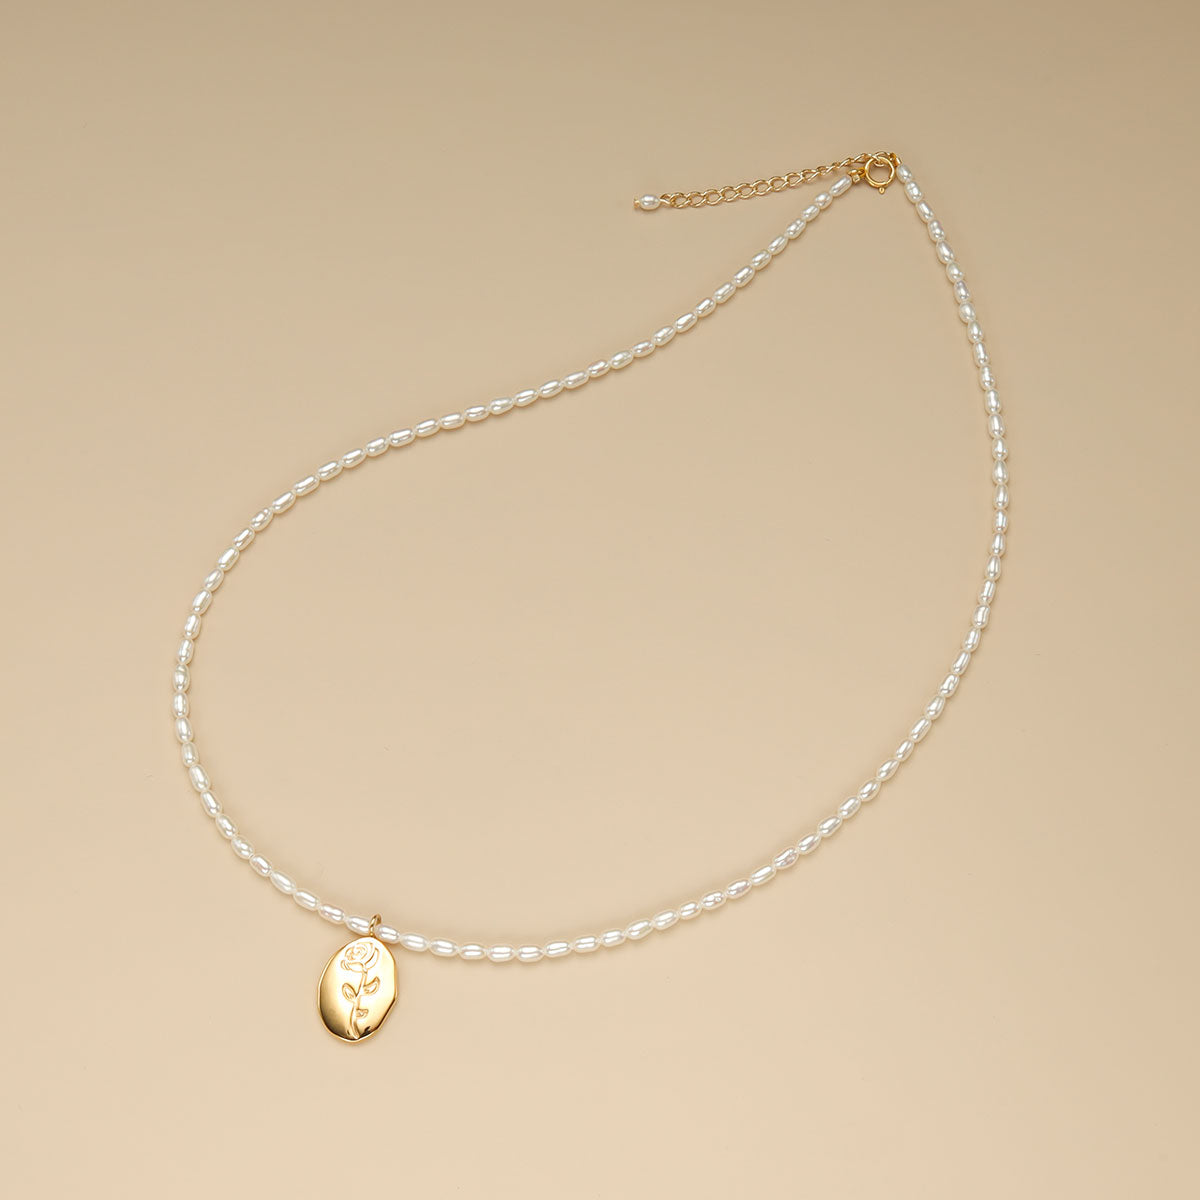 A charm pearl necklace with spring ring clasp.